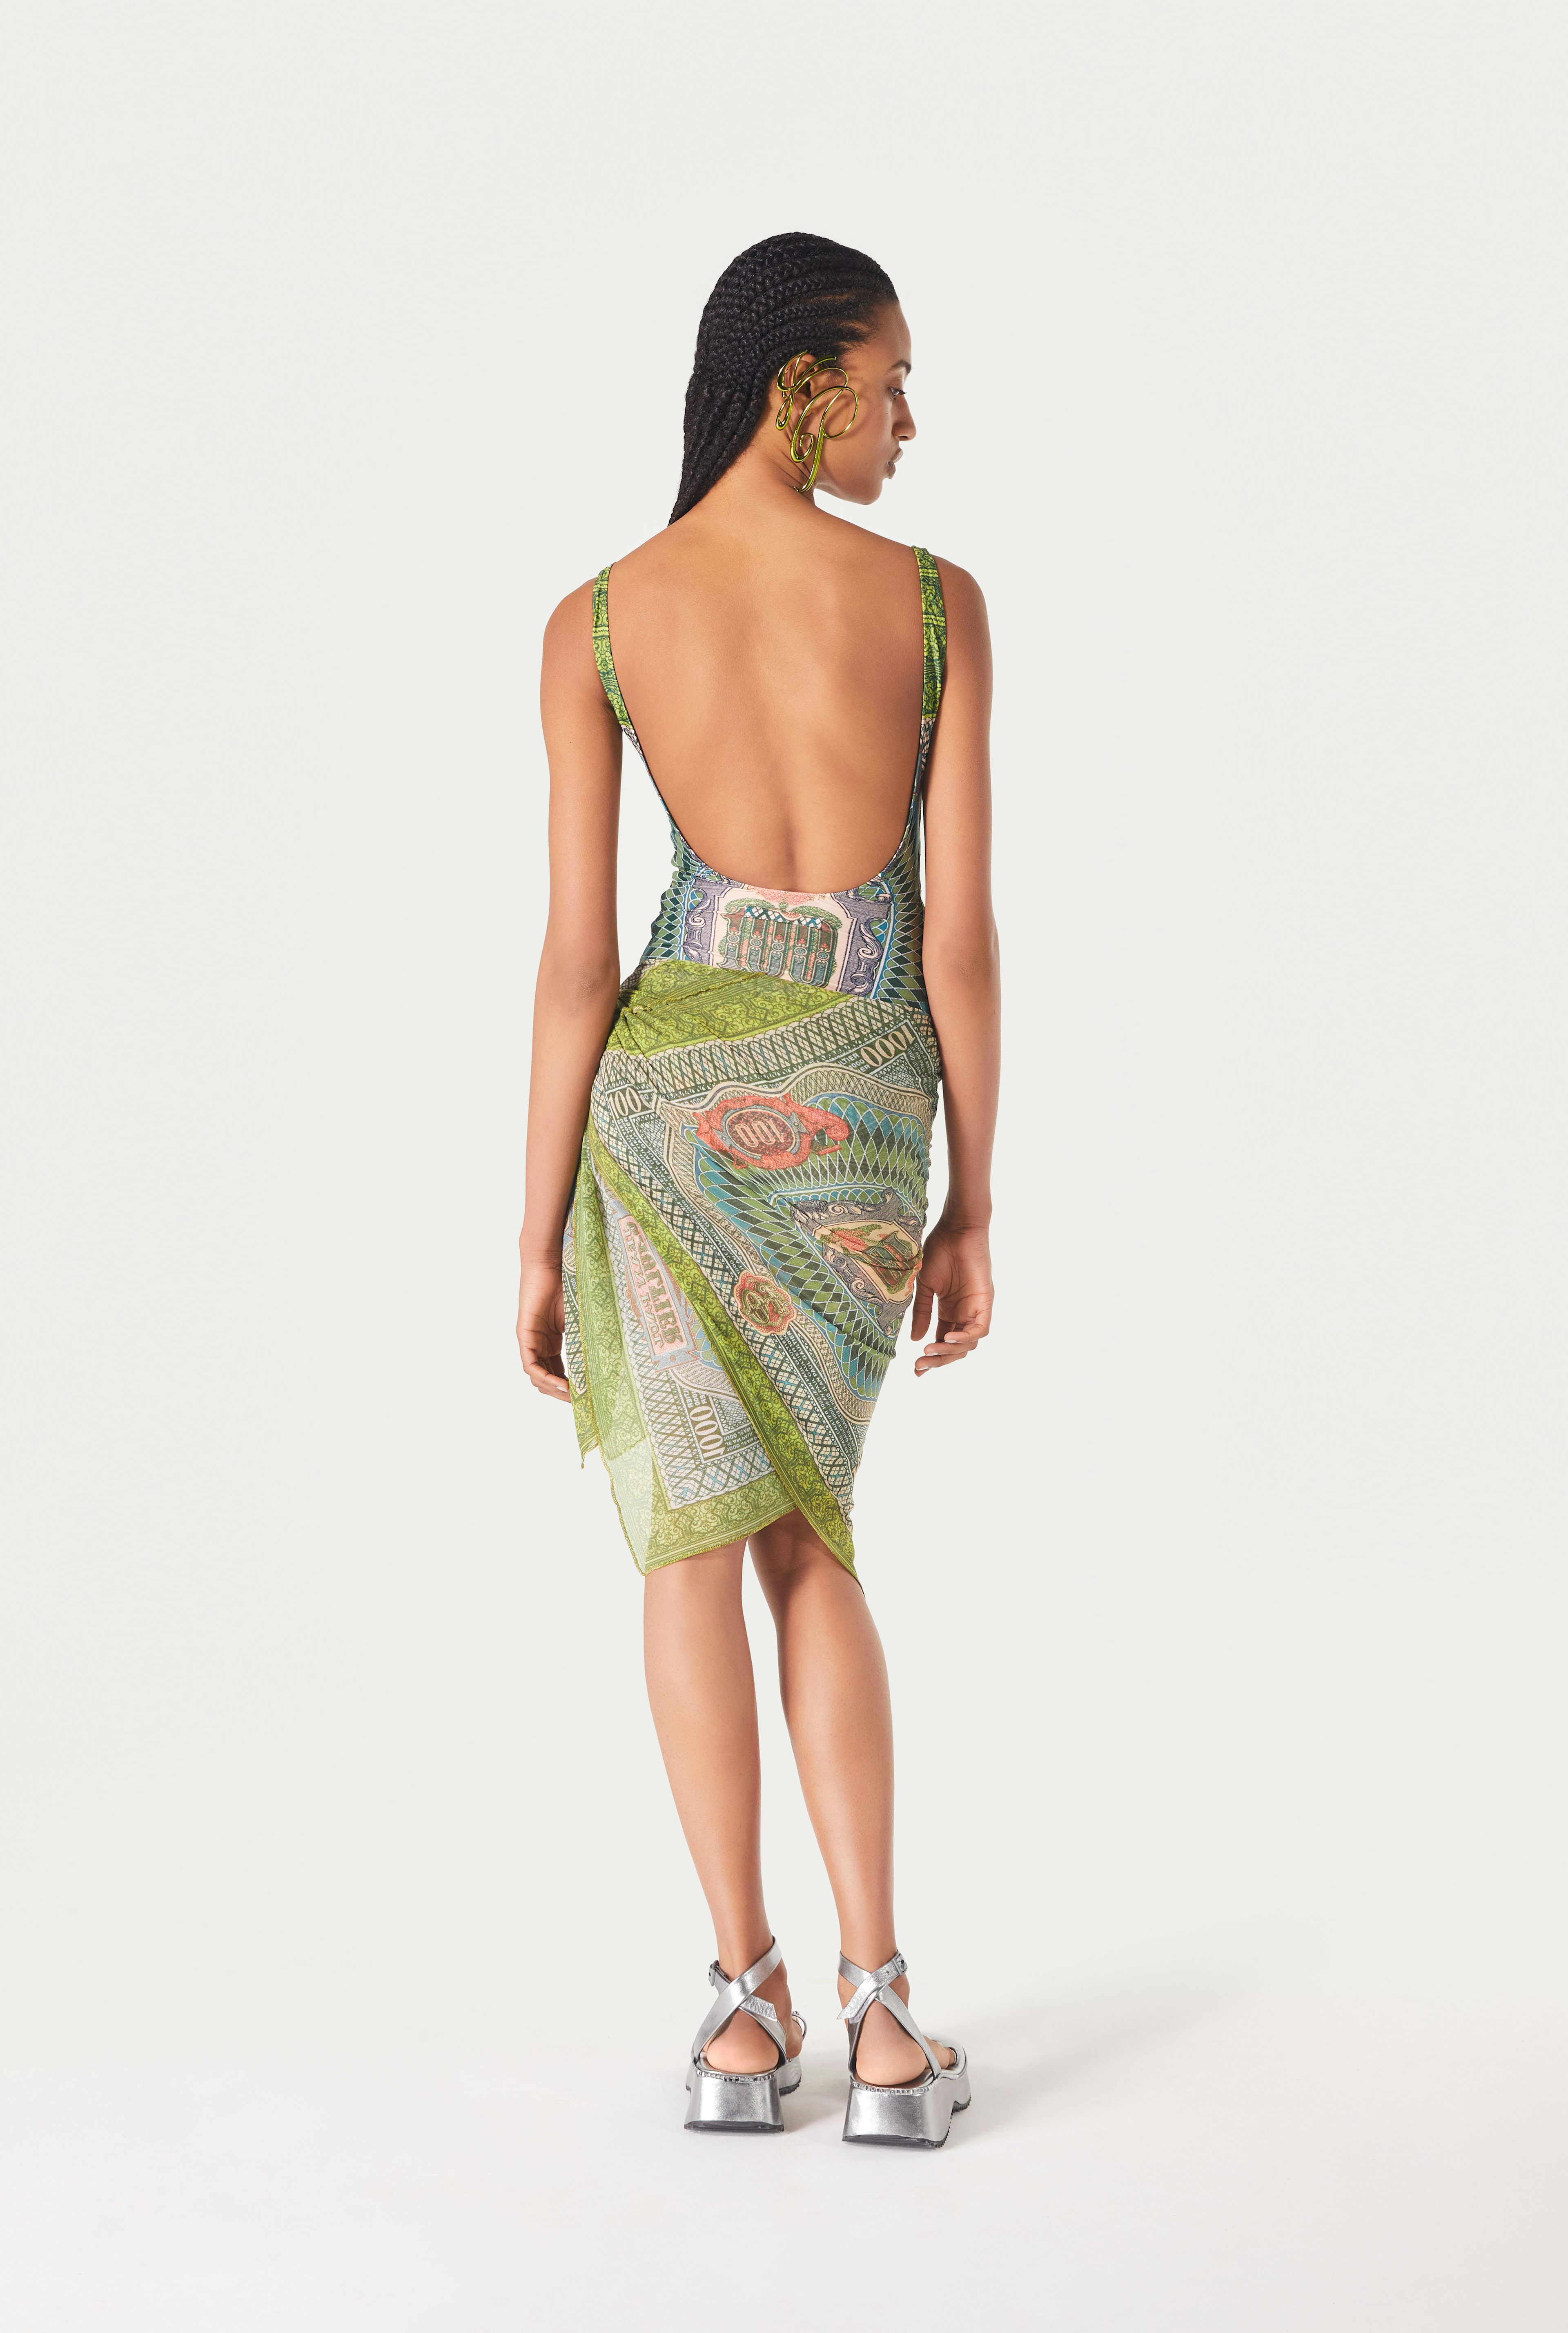 The Banknote Sarong Jean Paul Gaultier